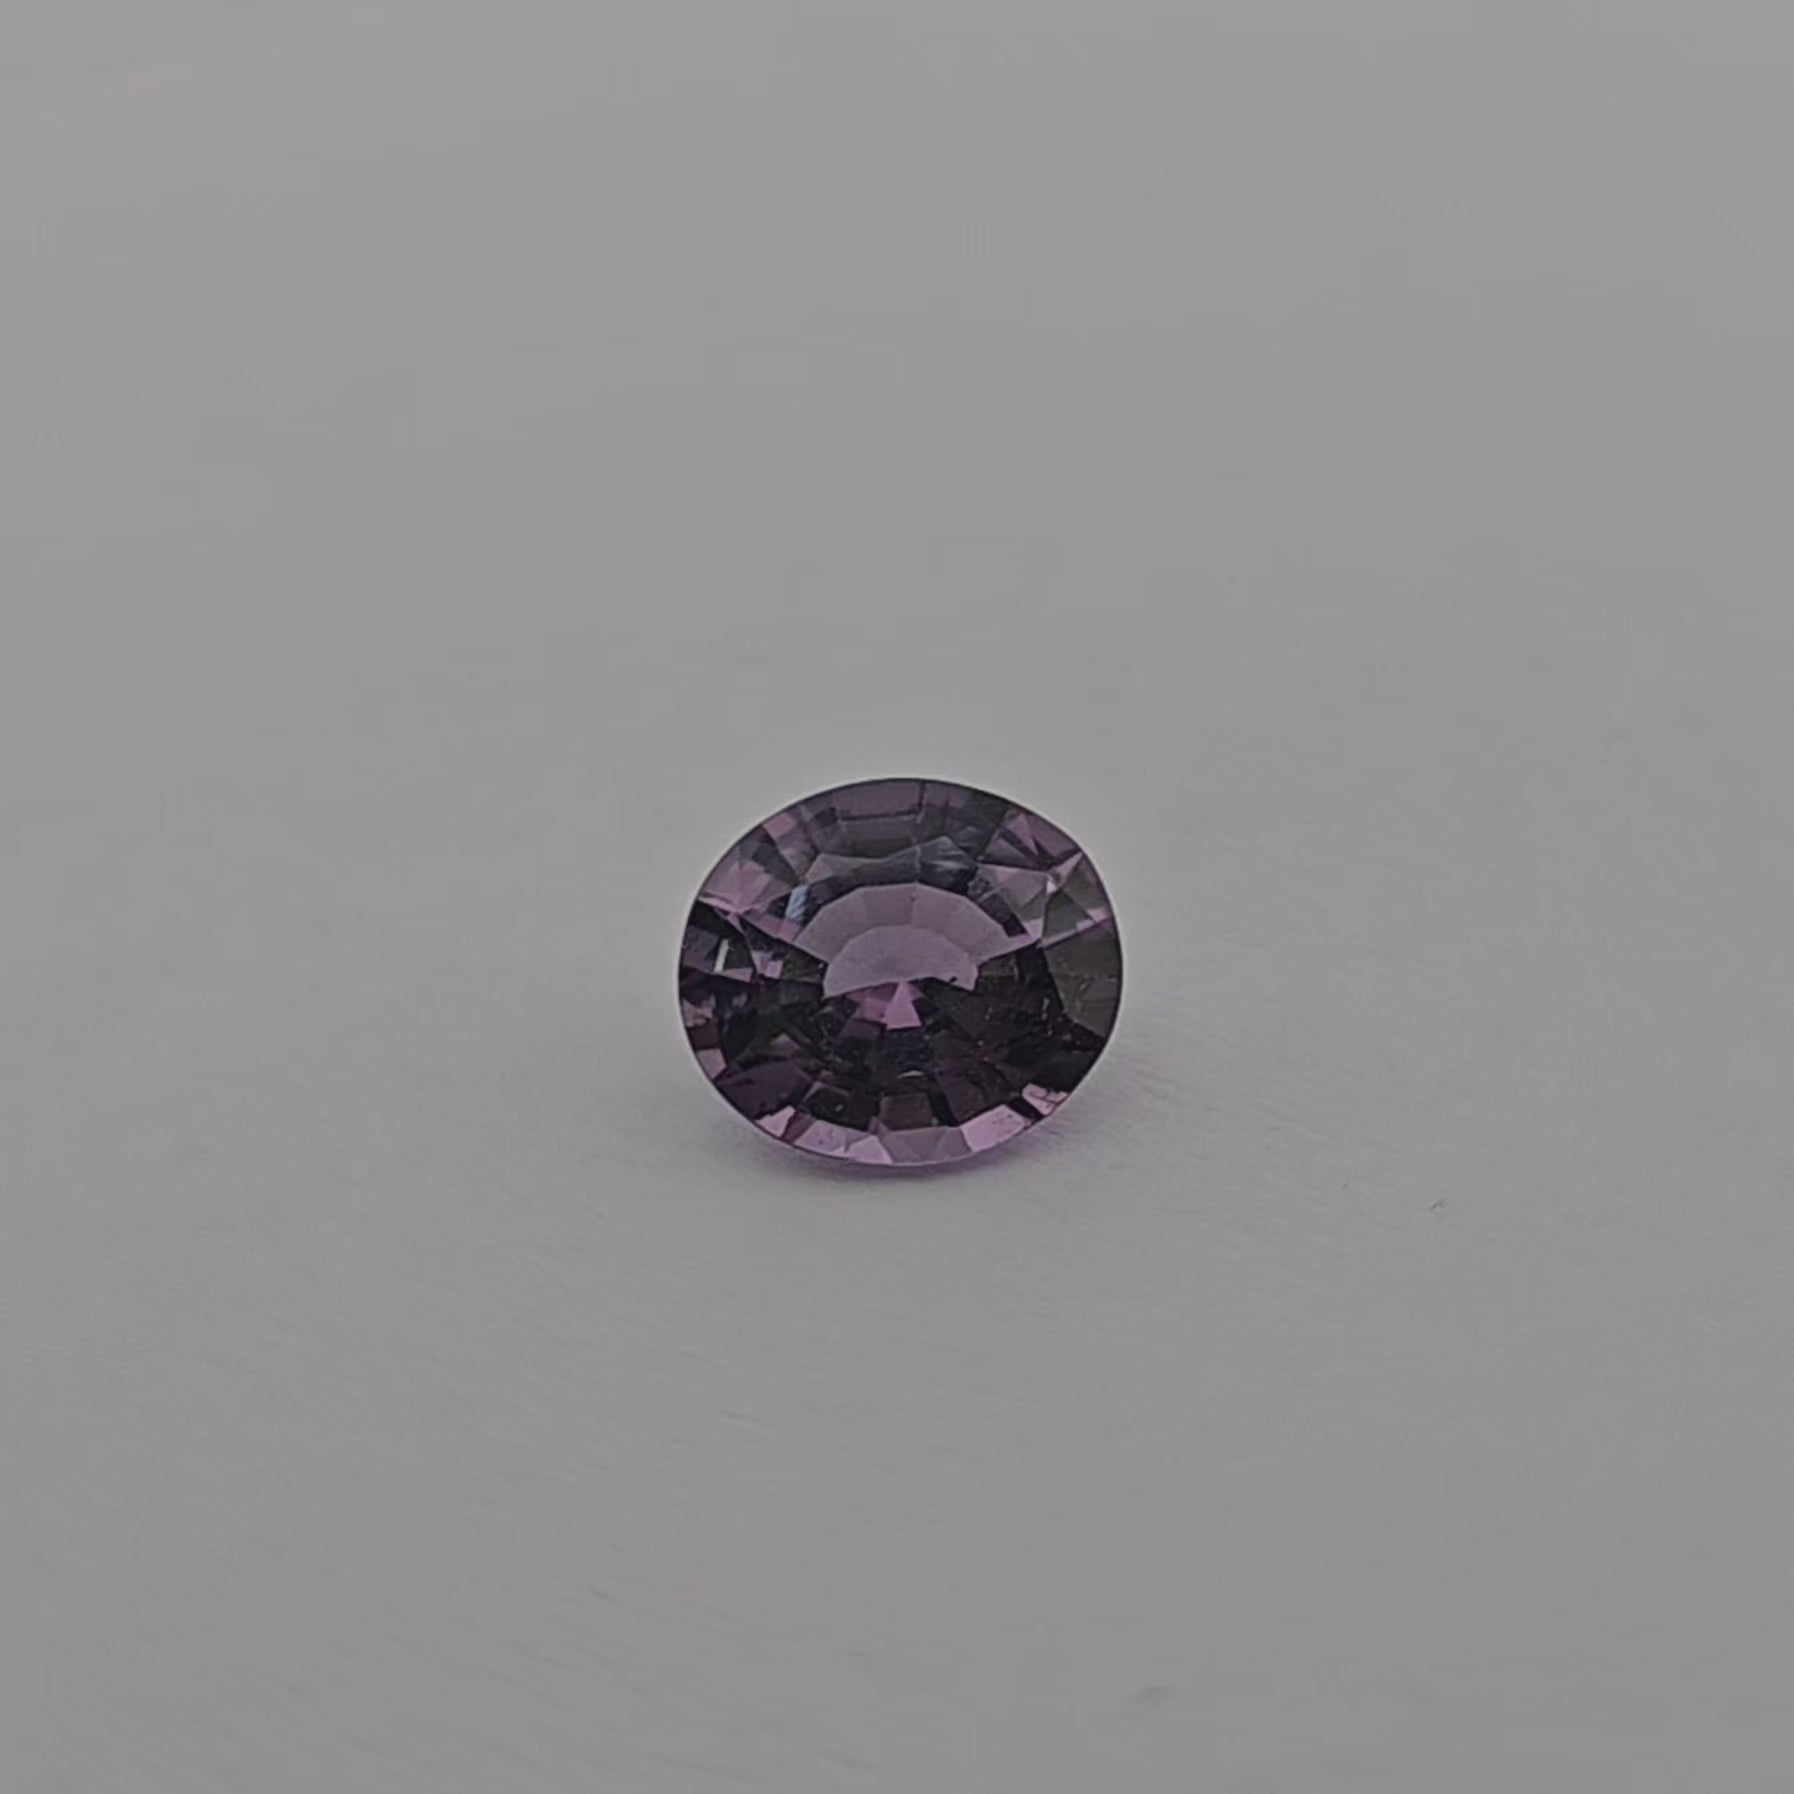 Natural Purple Spinel Stone 1.88 Carats Oval Cut (8.5 x 7.5 mm)